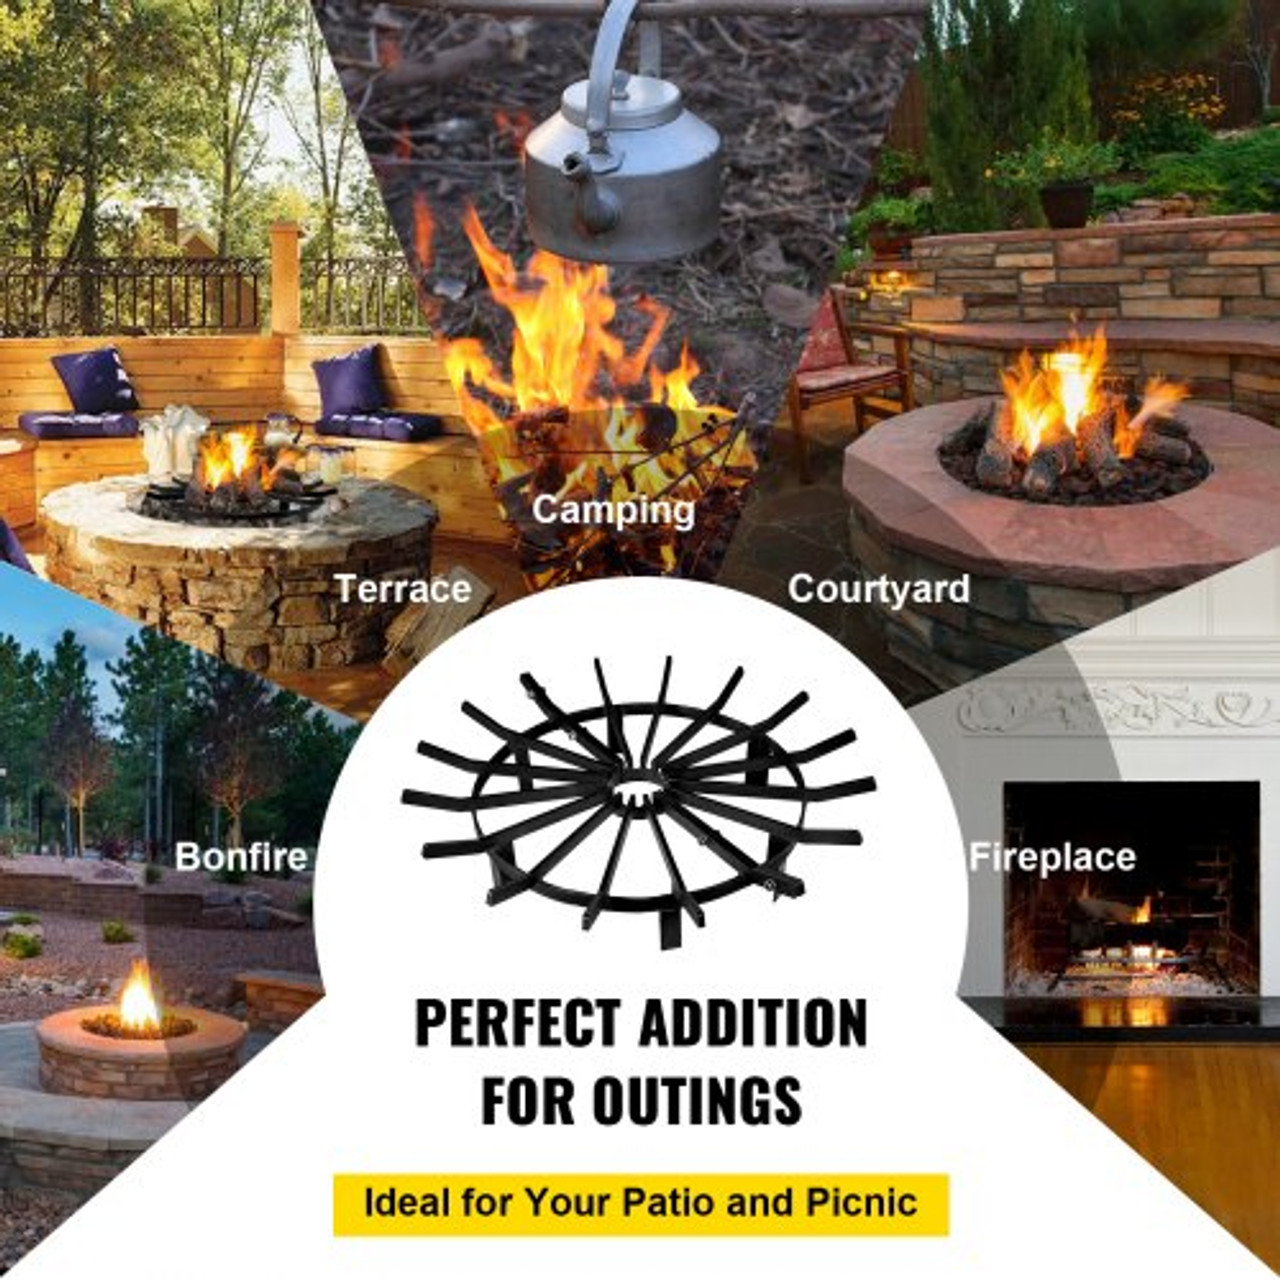 28in Fire Grate Log Grate ,Wagon Wheel Firewood Grates 16 Iron Bars, Fireplace Grates Burning Rack Holder 6 Legs for Indoor Chimney, Hearth Wood Stove and Outdoor Camping Fire Pit